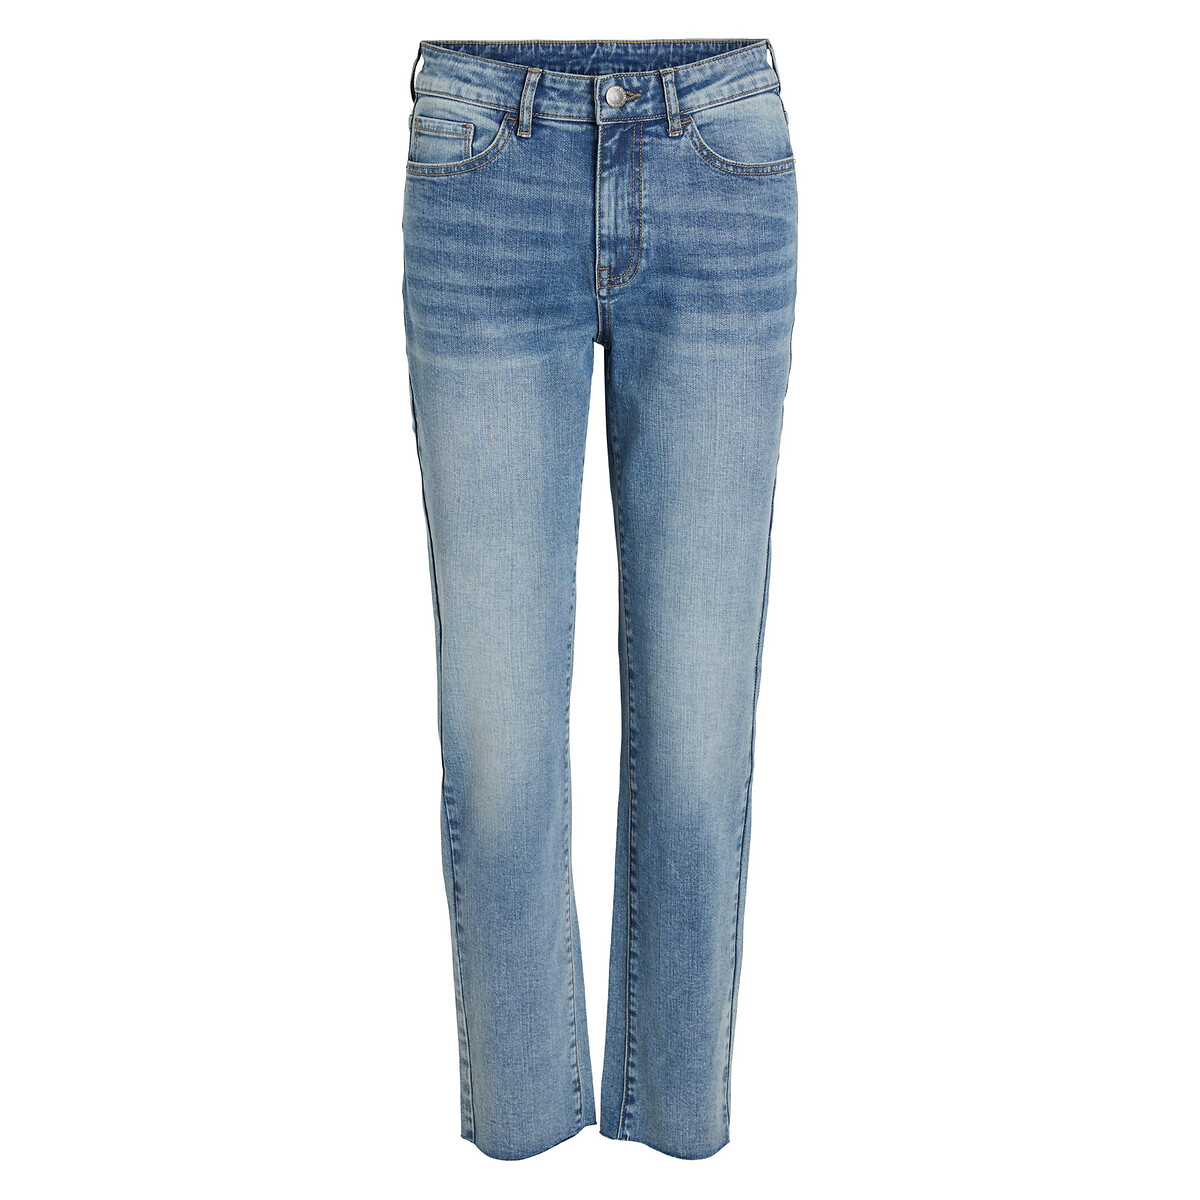 Image of Regular Fit Straight Jeans in Mid Rise